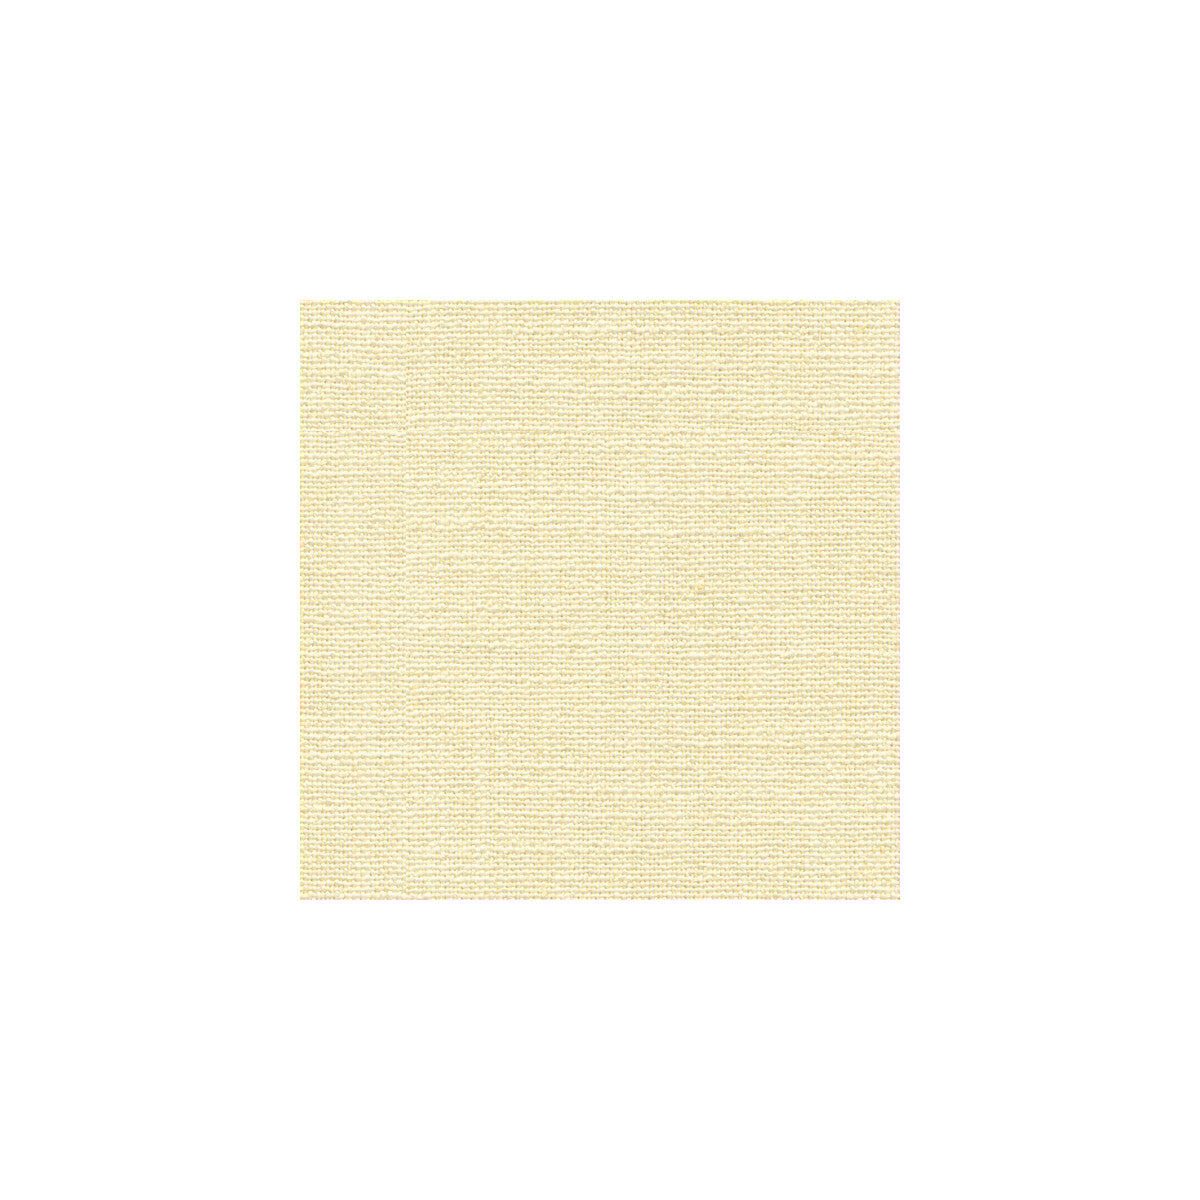 Denman fabric in ivory color - pattern 33008.1.0 - by Kravet Basics in the Sarah Richardson Affinity collection